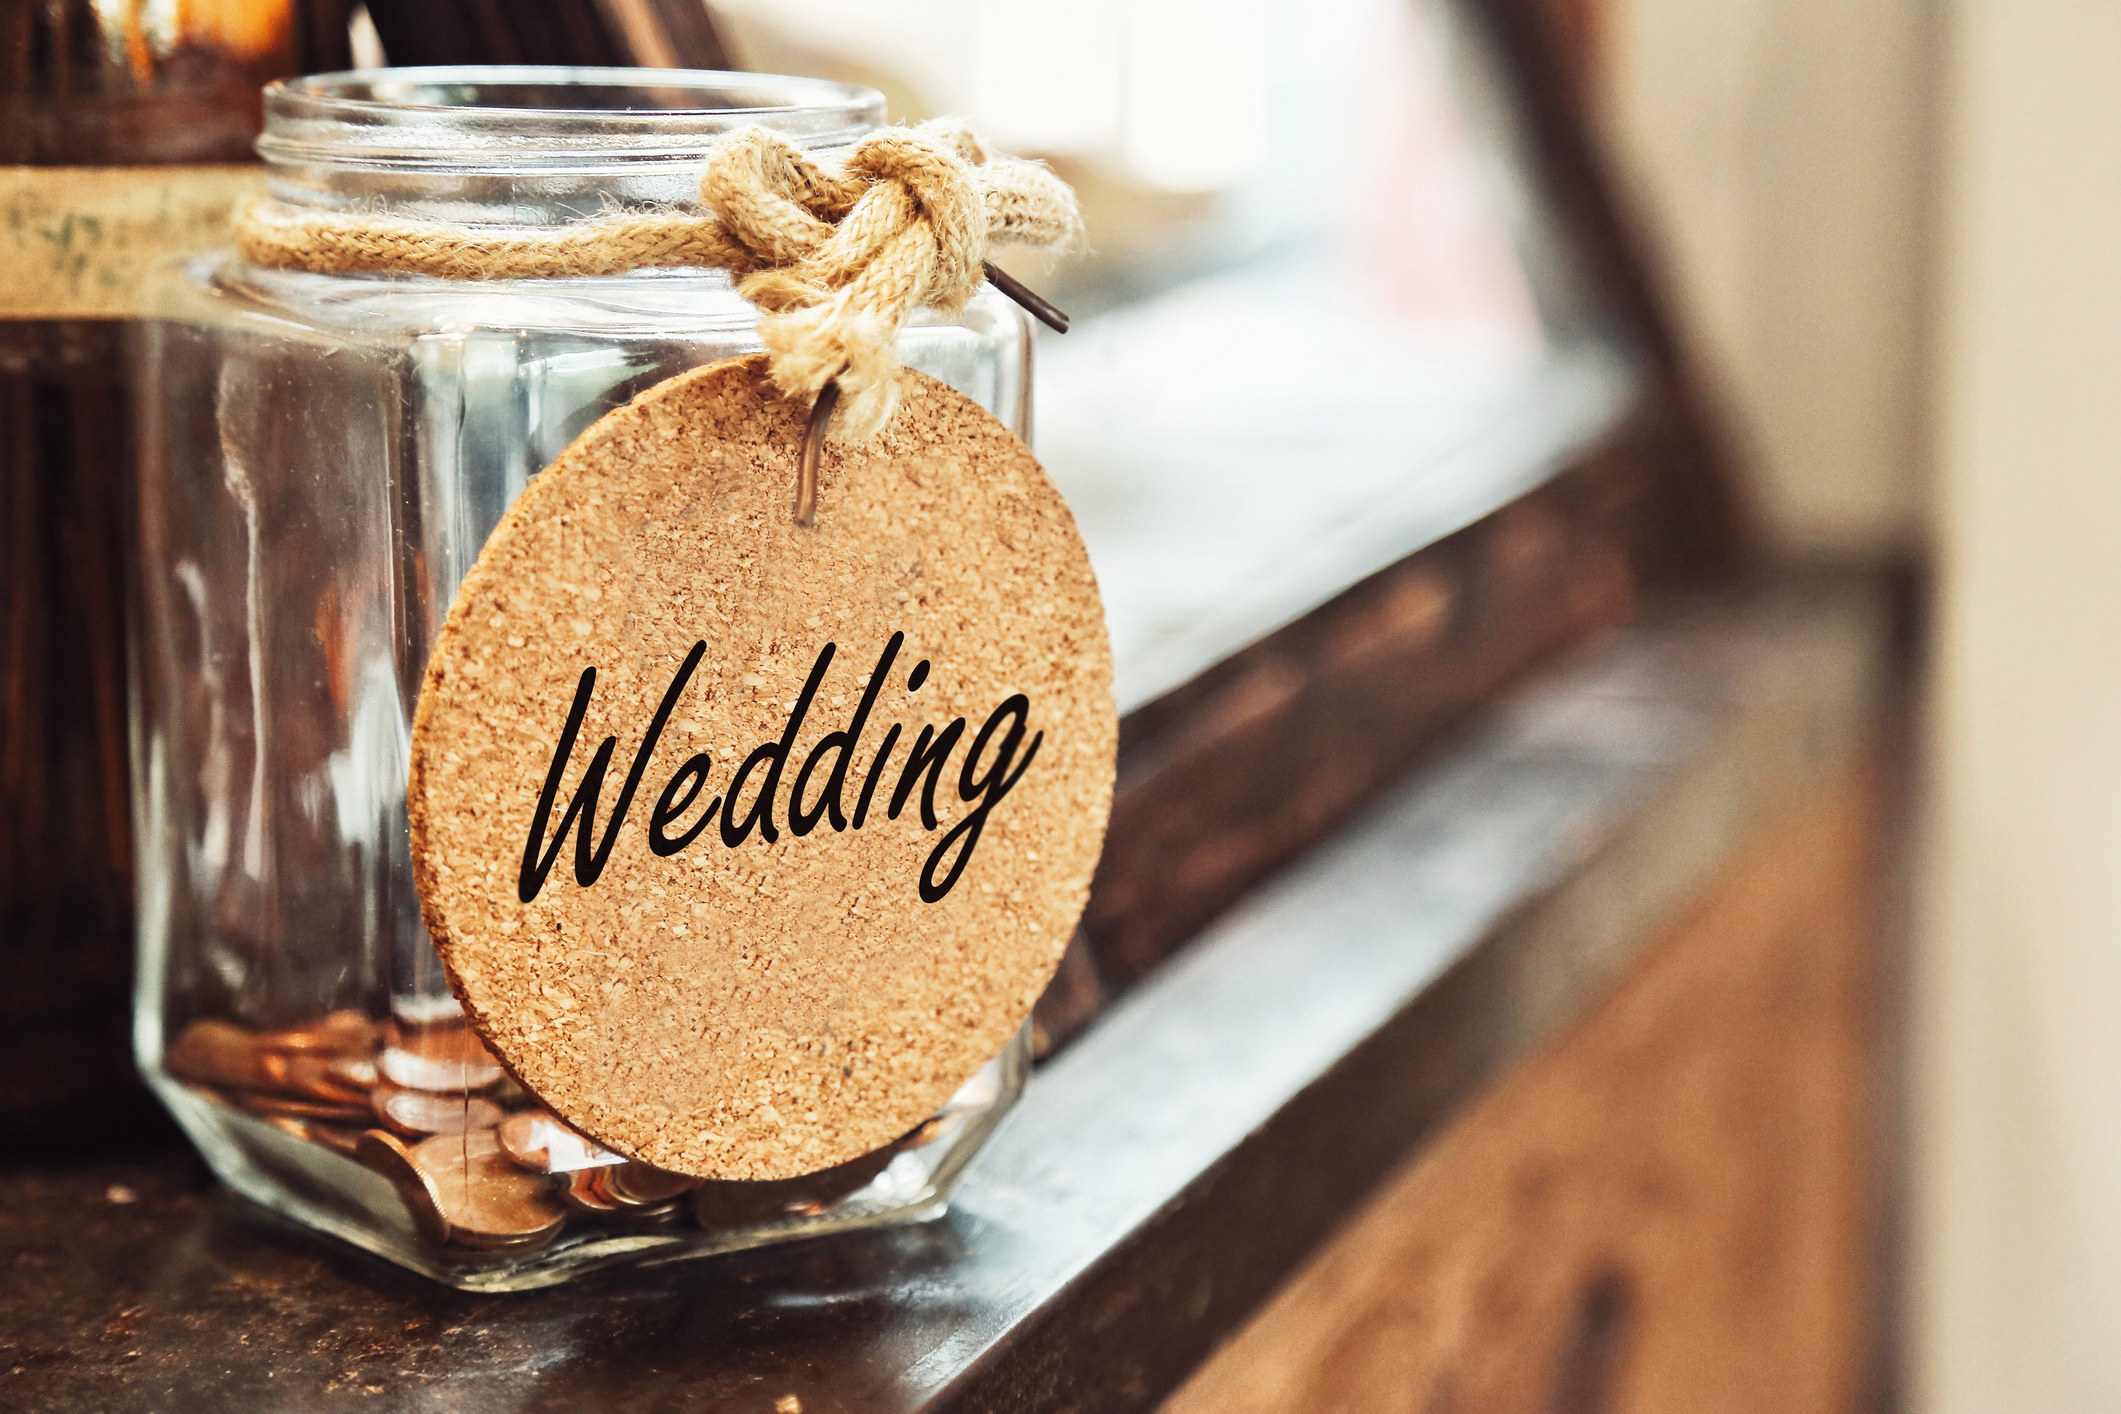 A jar with a &quot;Wedding&quot; label on it